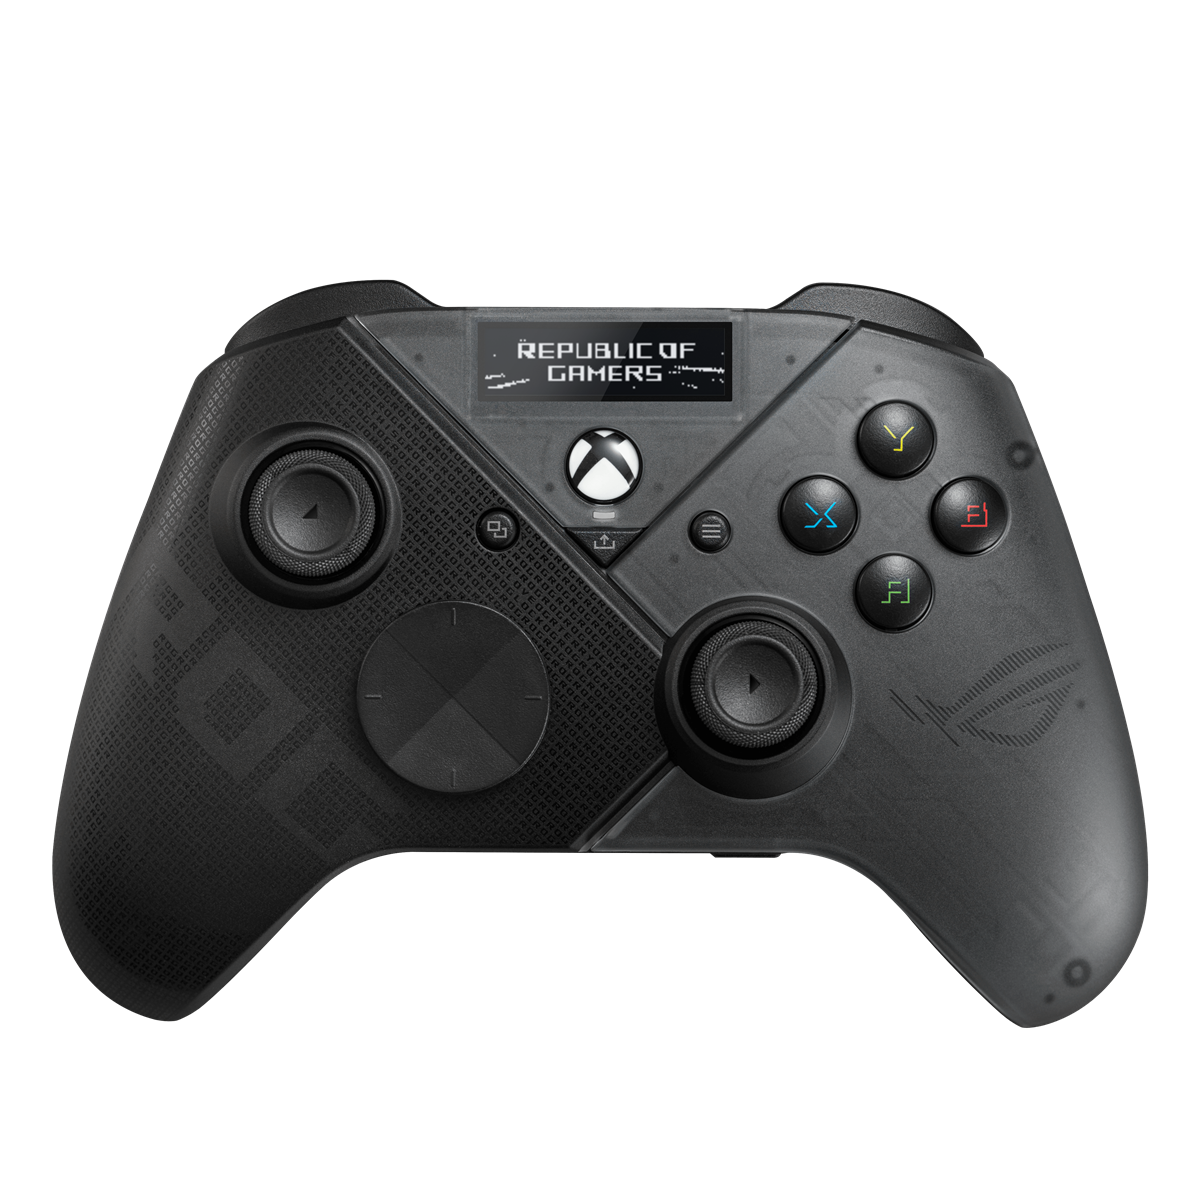 ASUS ROG Raikiri PRO (GD300X) PC Gamepad, Officially licences Xbox controller with OLED display